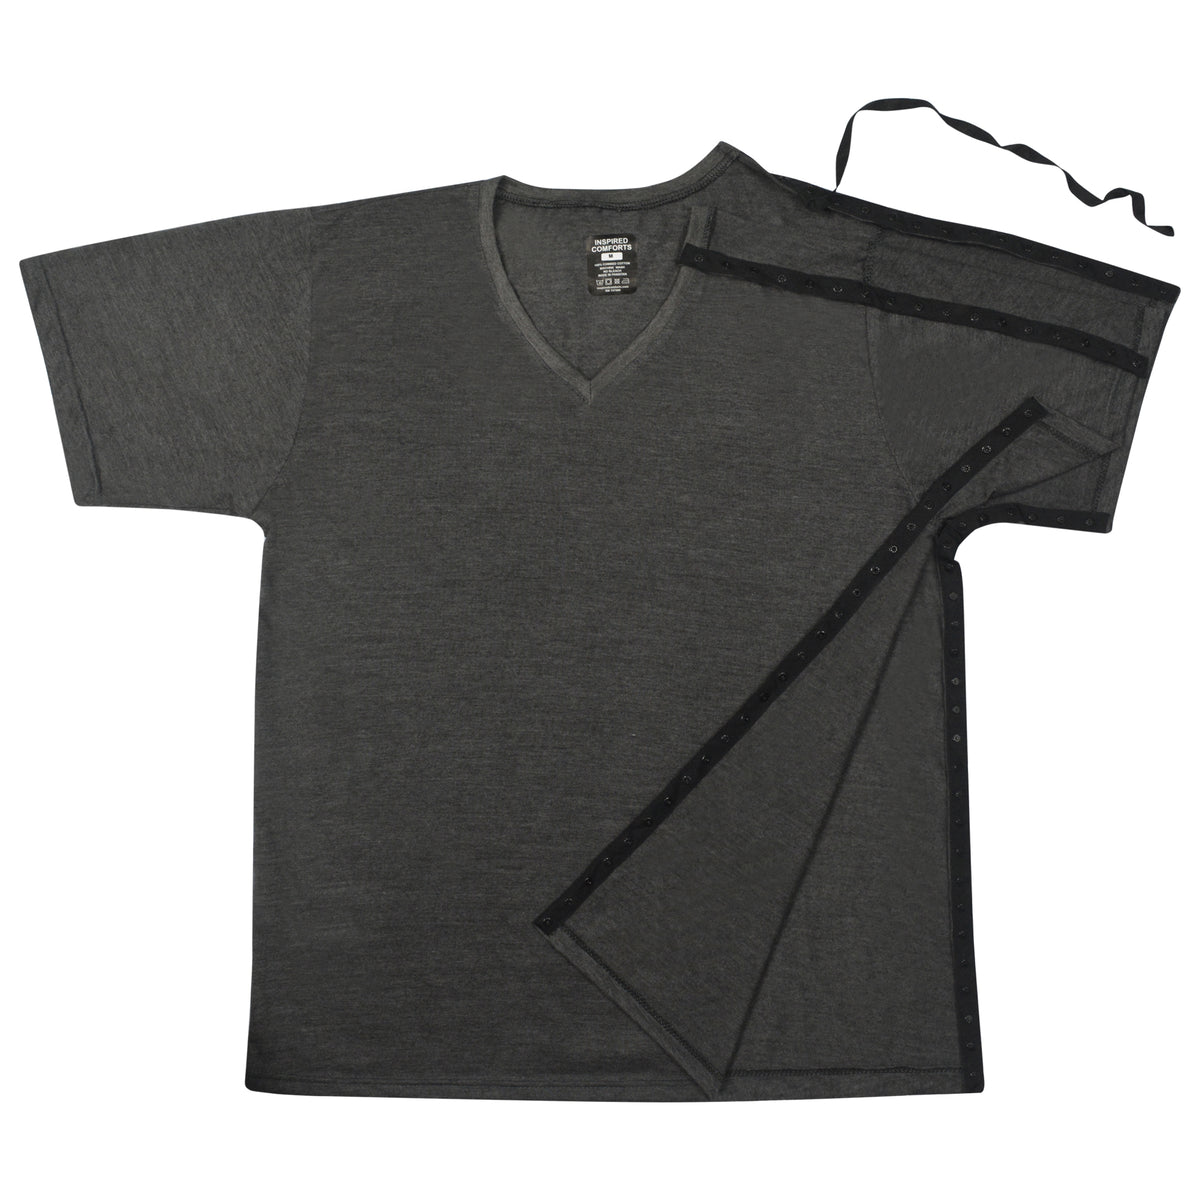 Surgery Recovery Shirt with Right Side Snap Access - V Neck